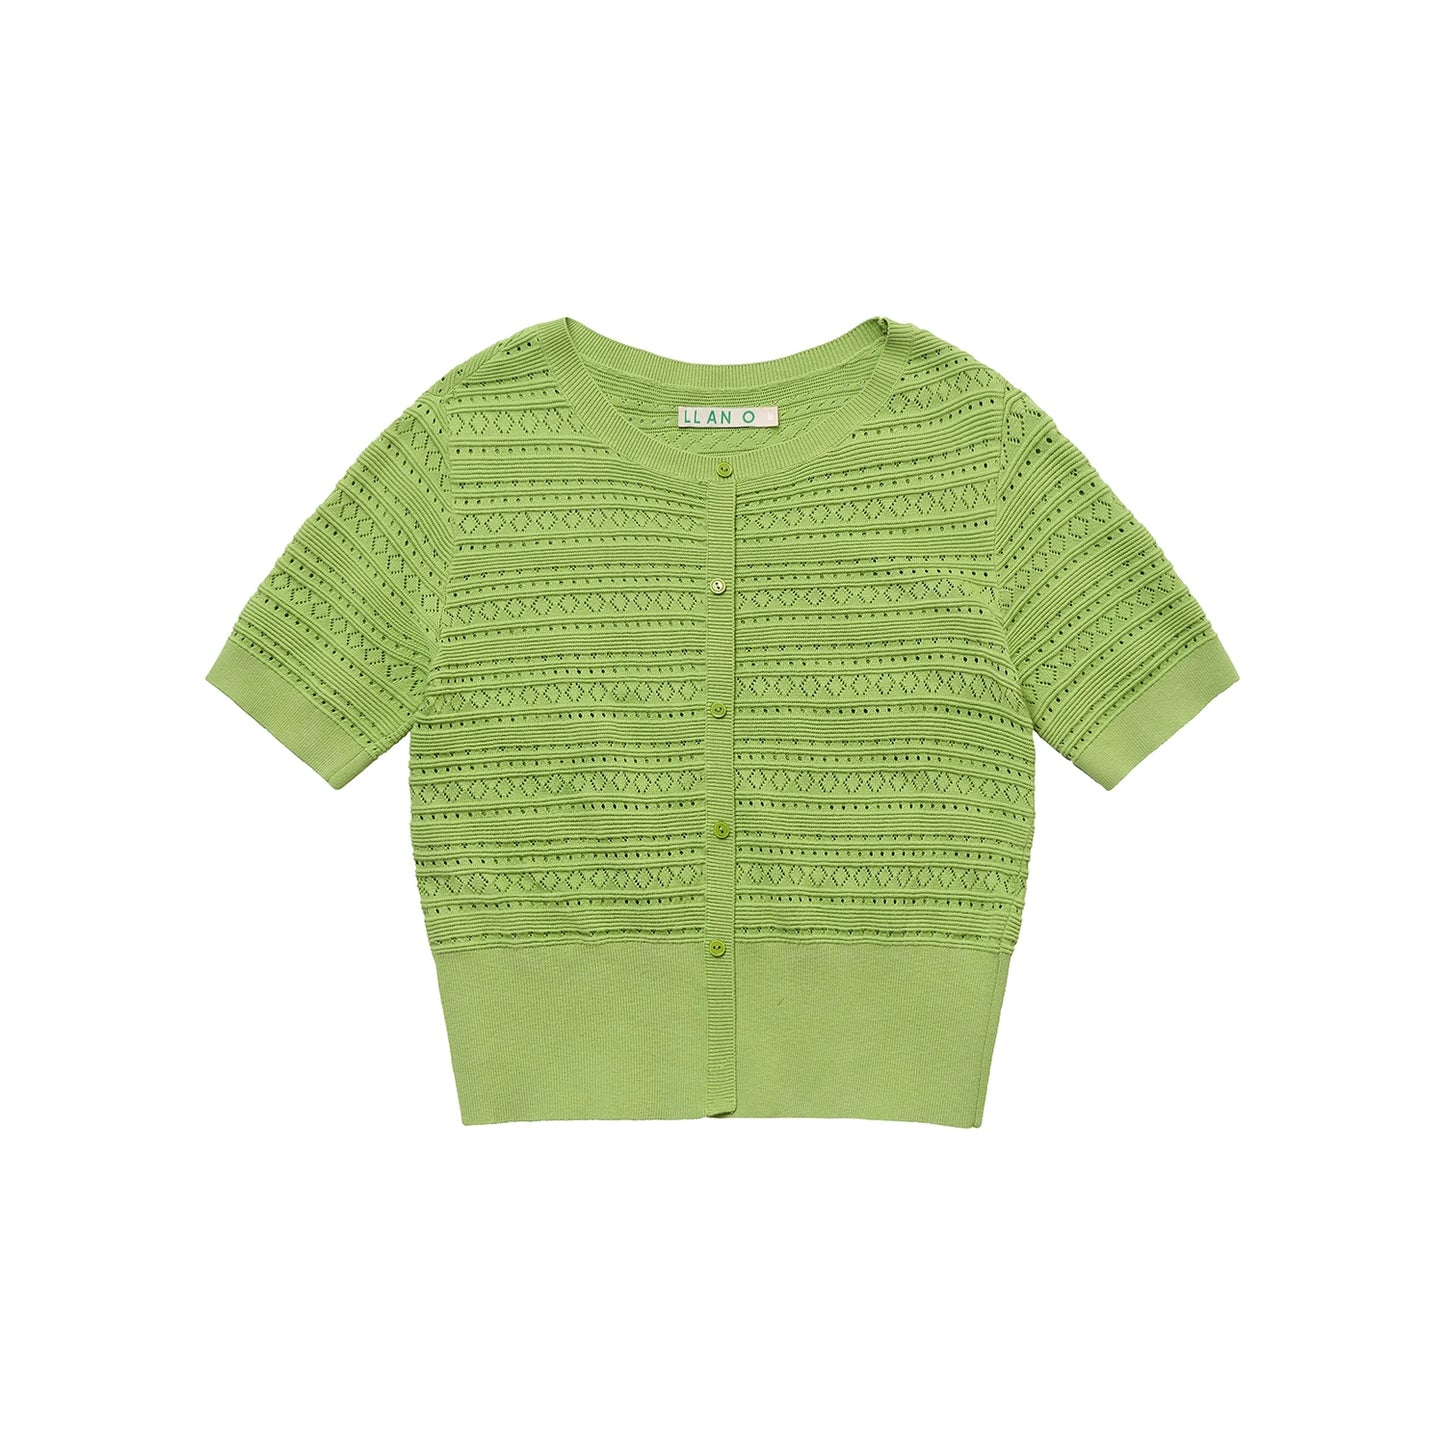 Retro Half-Sleeve Knitted Top